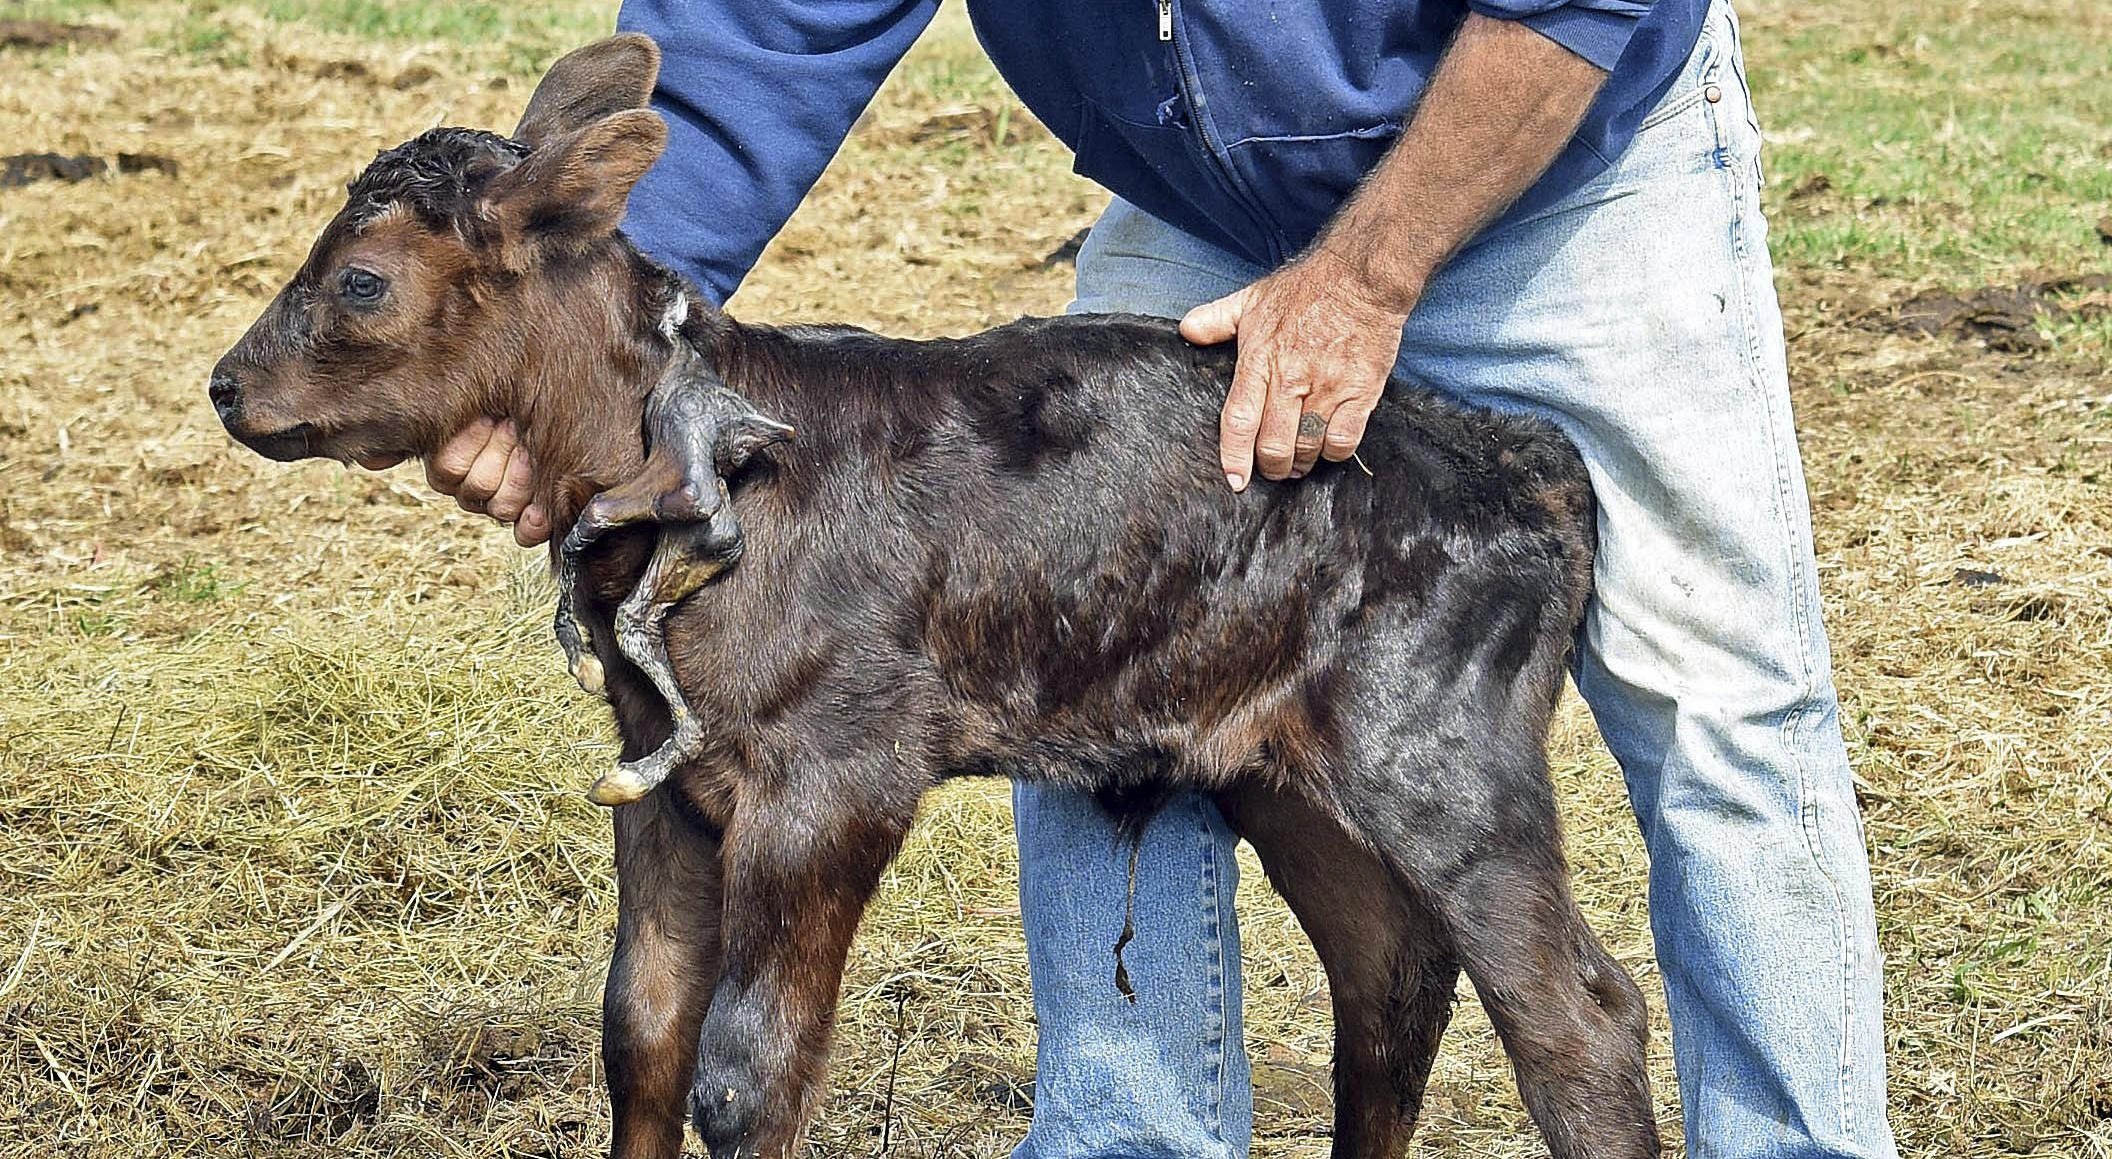 Calf born with 2 extra legs attached to its neck - CBS News